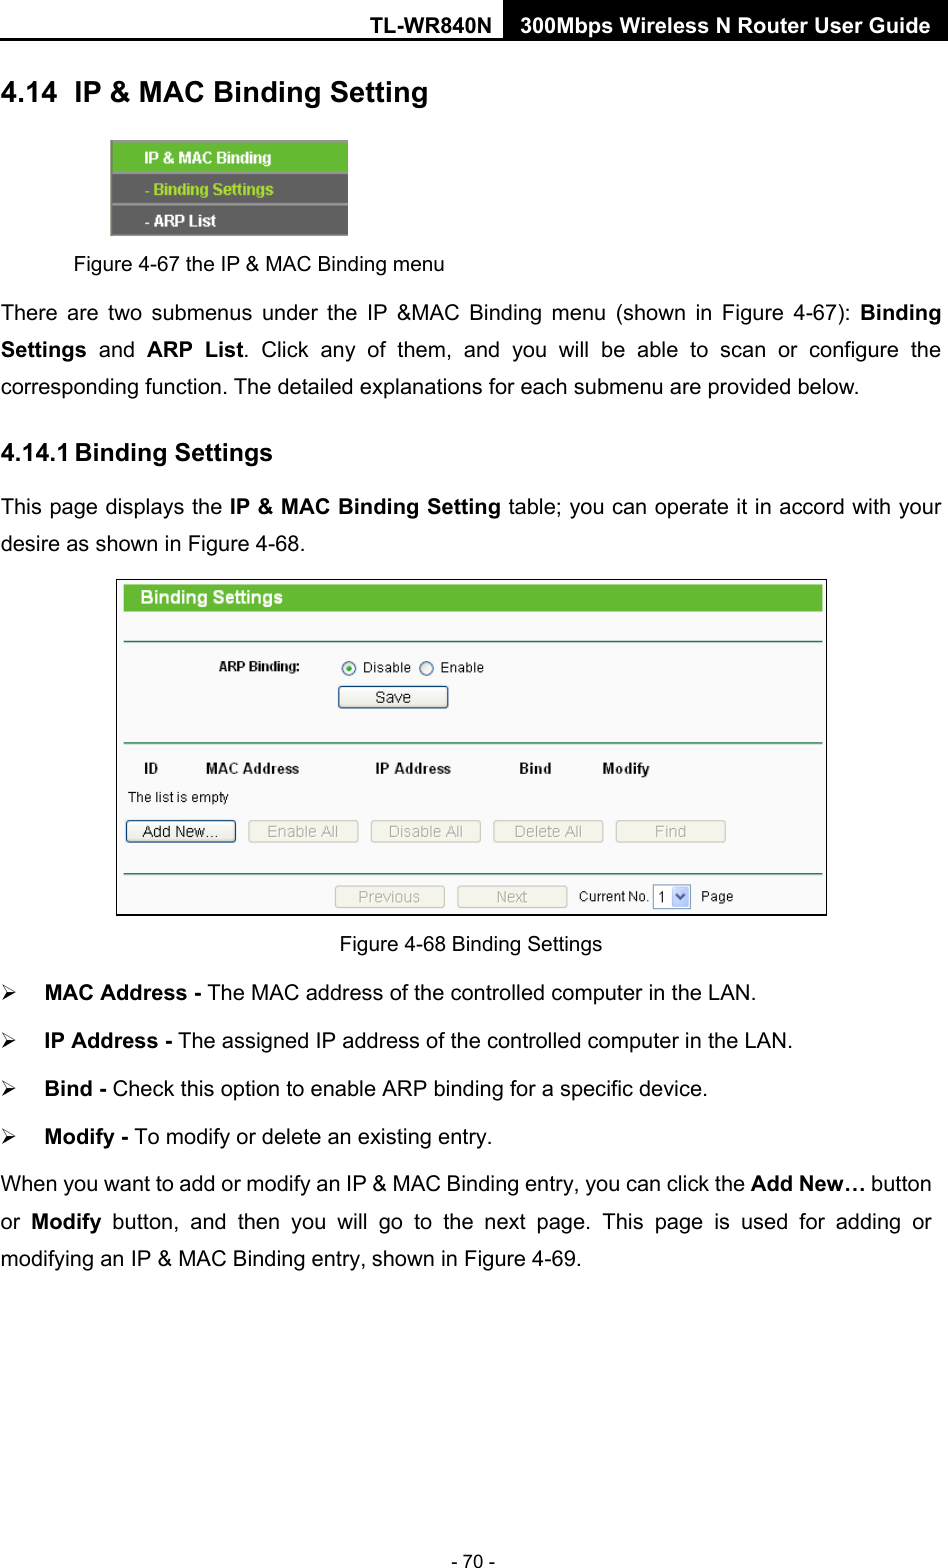 TL-WR840N 300Mbps Wireless N Router User Guide  - 70 - 4.14   IP &amp; MAC Binding Setting  Figure 4-67 the IP &amp; MAC Binding menu There are two submenus under the IP &amp;MAC Binding menu (shown in Figure  4-67):  Binding Settings  and ARP List. Click any of them, and you will be able to scan or configure the corresponding function. The detailed explanations for each submenu are provided below. 4.14.1 Binding Settings This page displays the IP &amp; MAC Binding Setting table; you can operate it in accord with your desire as shown in Figure 4-68.    Figure 4-68 Binding Settings  MAC Address - The MAC address of the controlled computer in the LAN.    IP Address - The assigned IP address of the controlled computer in the LAN.    Bind - Check this option to enable ARP binding for a specific device.    Modify - To modify or delete an existing entry.   When you want to add or modify an IP &amp; MAC Binding entry, you can click the Add New… button or  Modify button, and then you will go to the next page. This page is used for adding or modifying an IP &amp; MAC Binding entry, shown in Figure 4-69.   